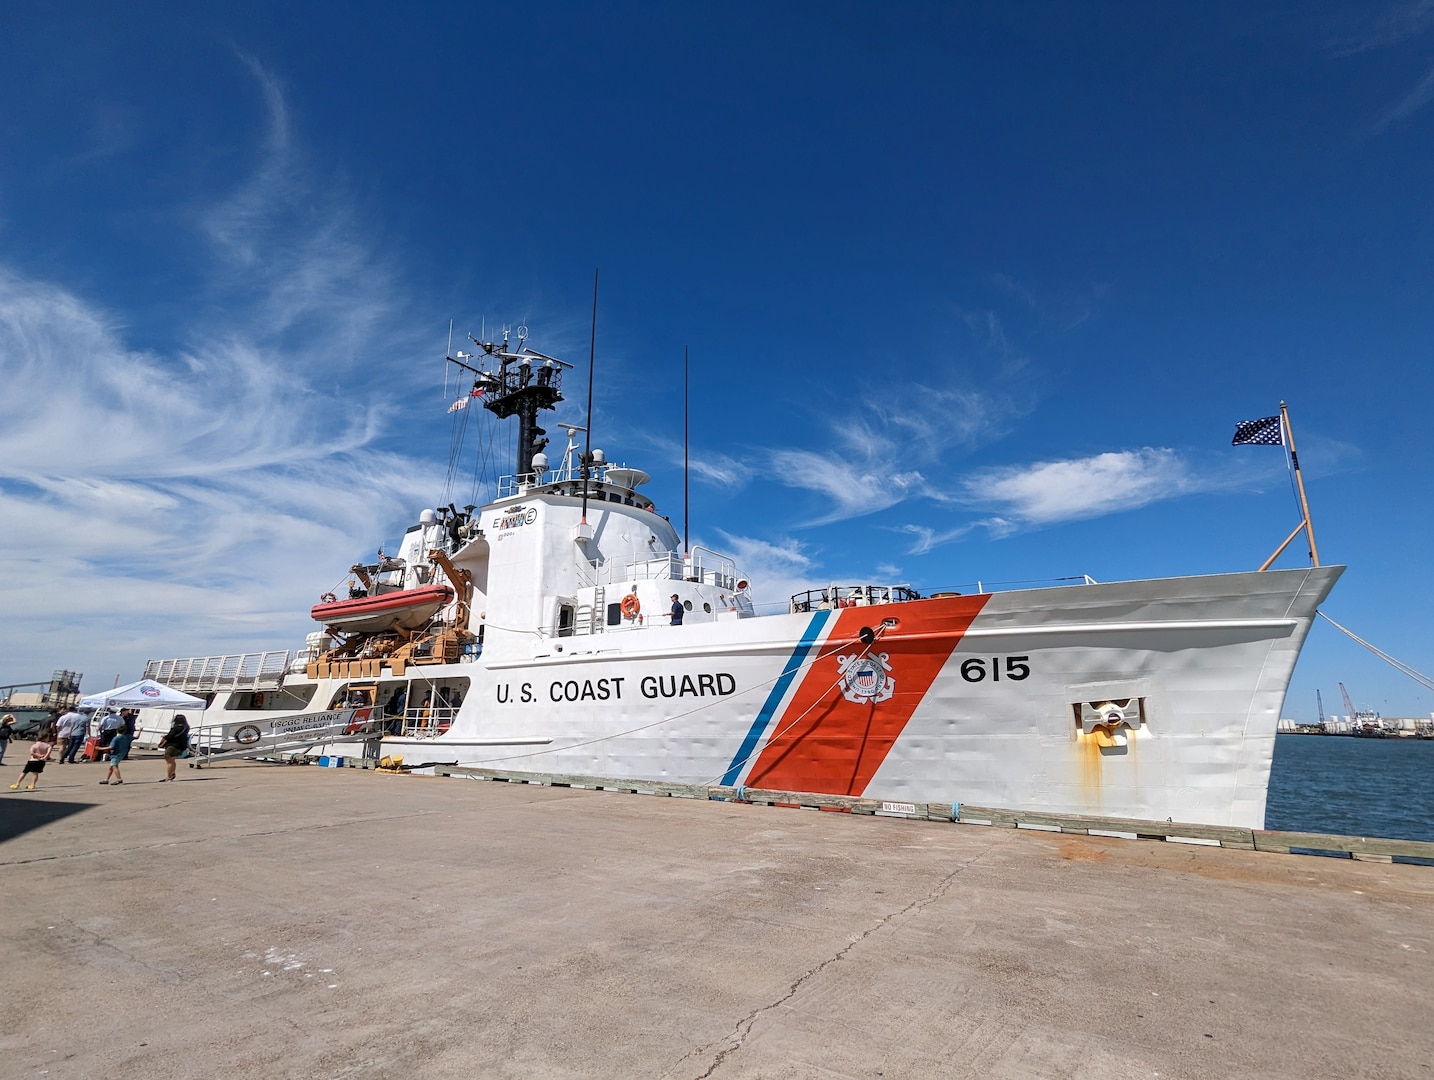 Visitors tour Coast Guard Cutter Reliance (WMEC 615), a 210-foot medium endurance cutter homeported in Pensacola, Florida, during the crew’s port call at Pier 21 in Galveston, Texas, Oct. 8, 2023. Approximately 400 visitors toured the Reliance, which was built in Houston and commissioned in Galveston in 1964. (U.S. Coast Guard photo by Auxiliarist Glenn Colaco)